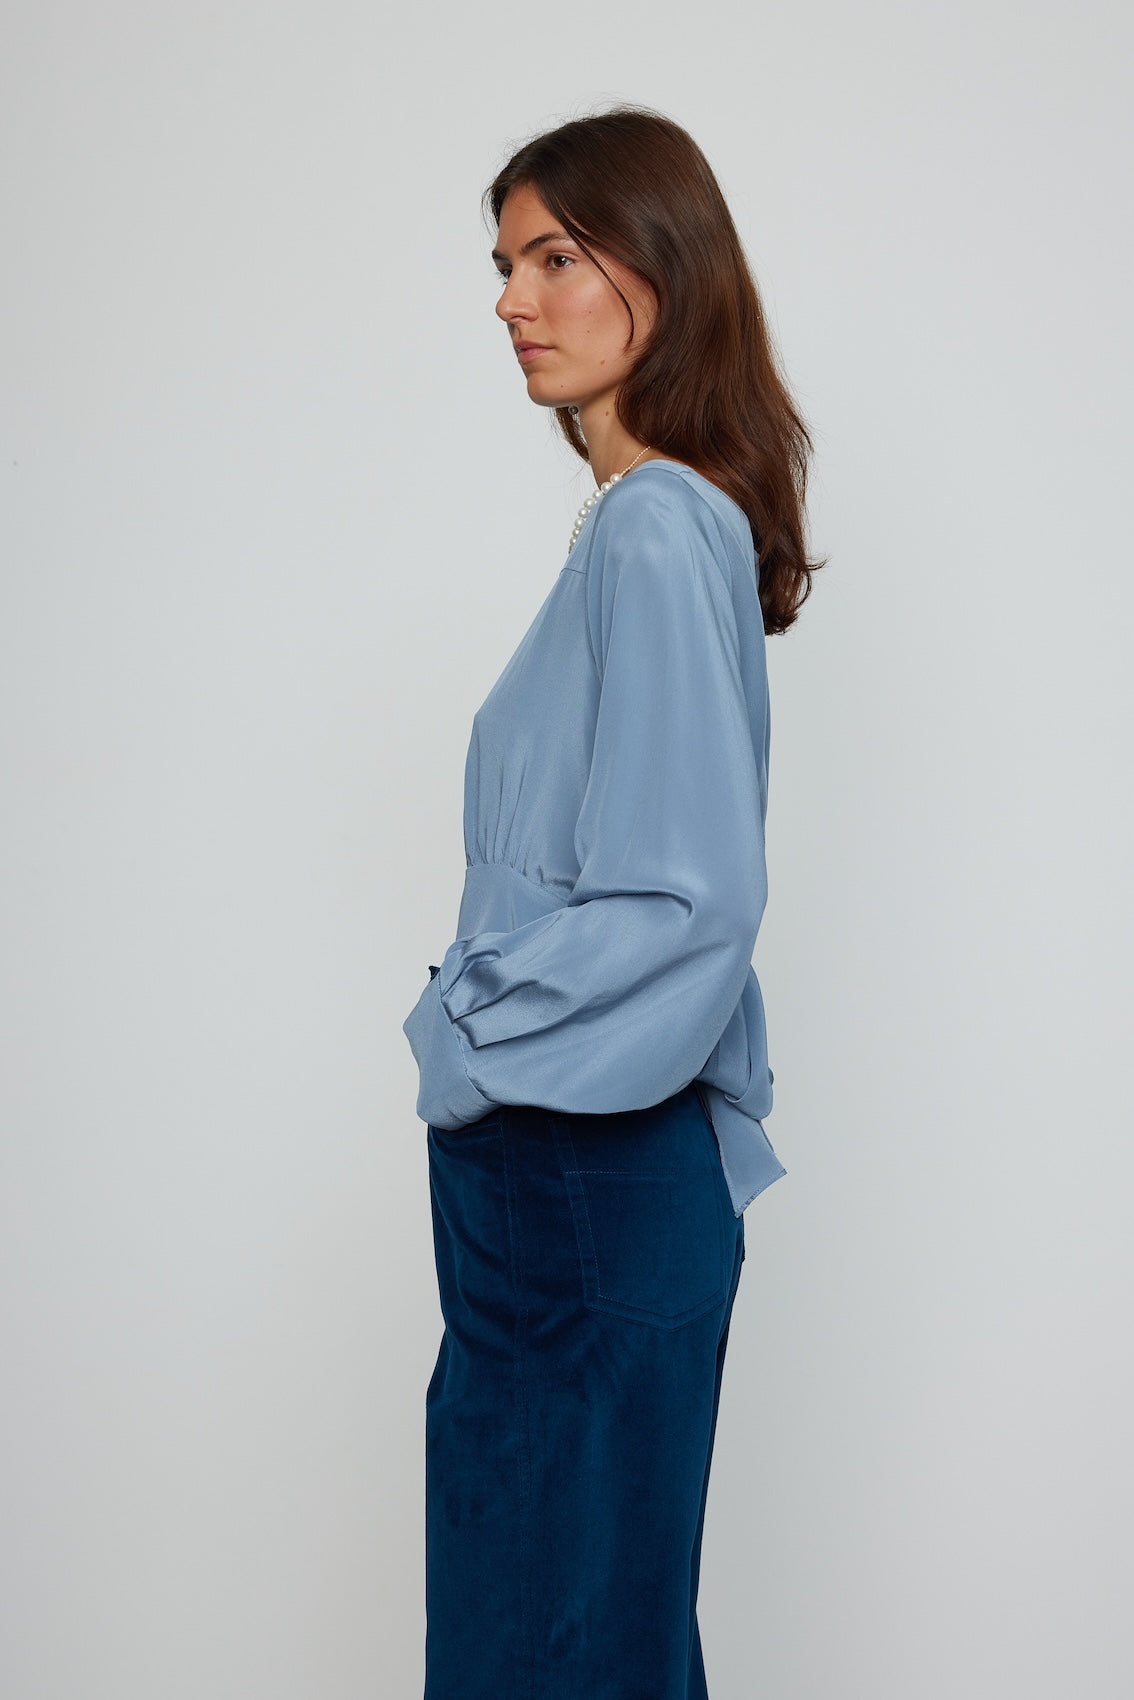 Caro Editions Olga Shirt features a straight neckline and our signature long draped sleeves made from soft crepe de chine silk. This shirt has a large bow at the back, which can be adjusted to fit perfectly around the waist. Material: 100% Silk.